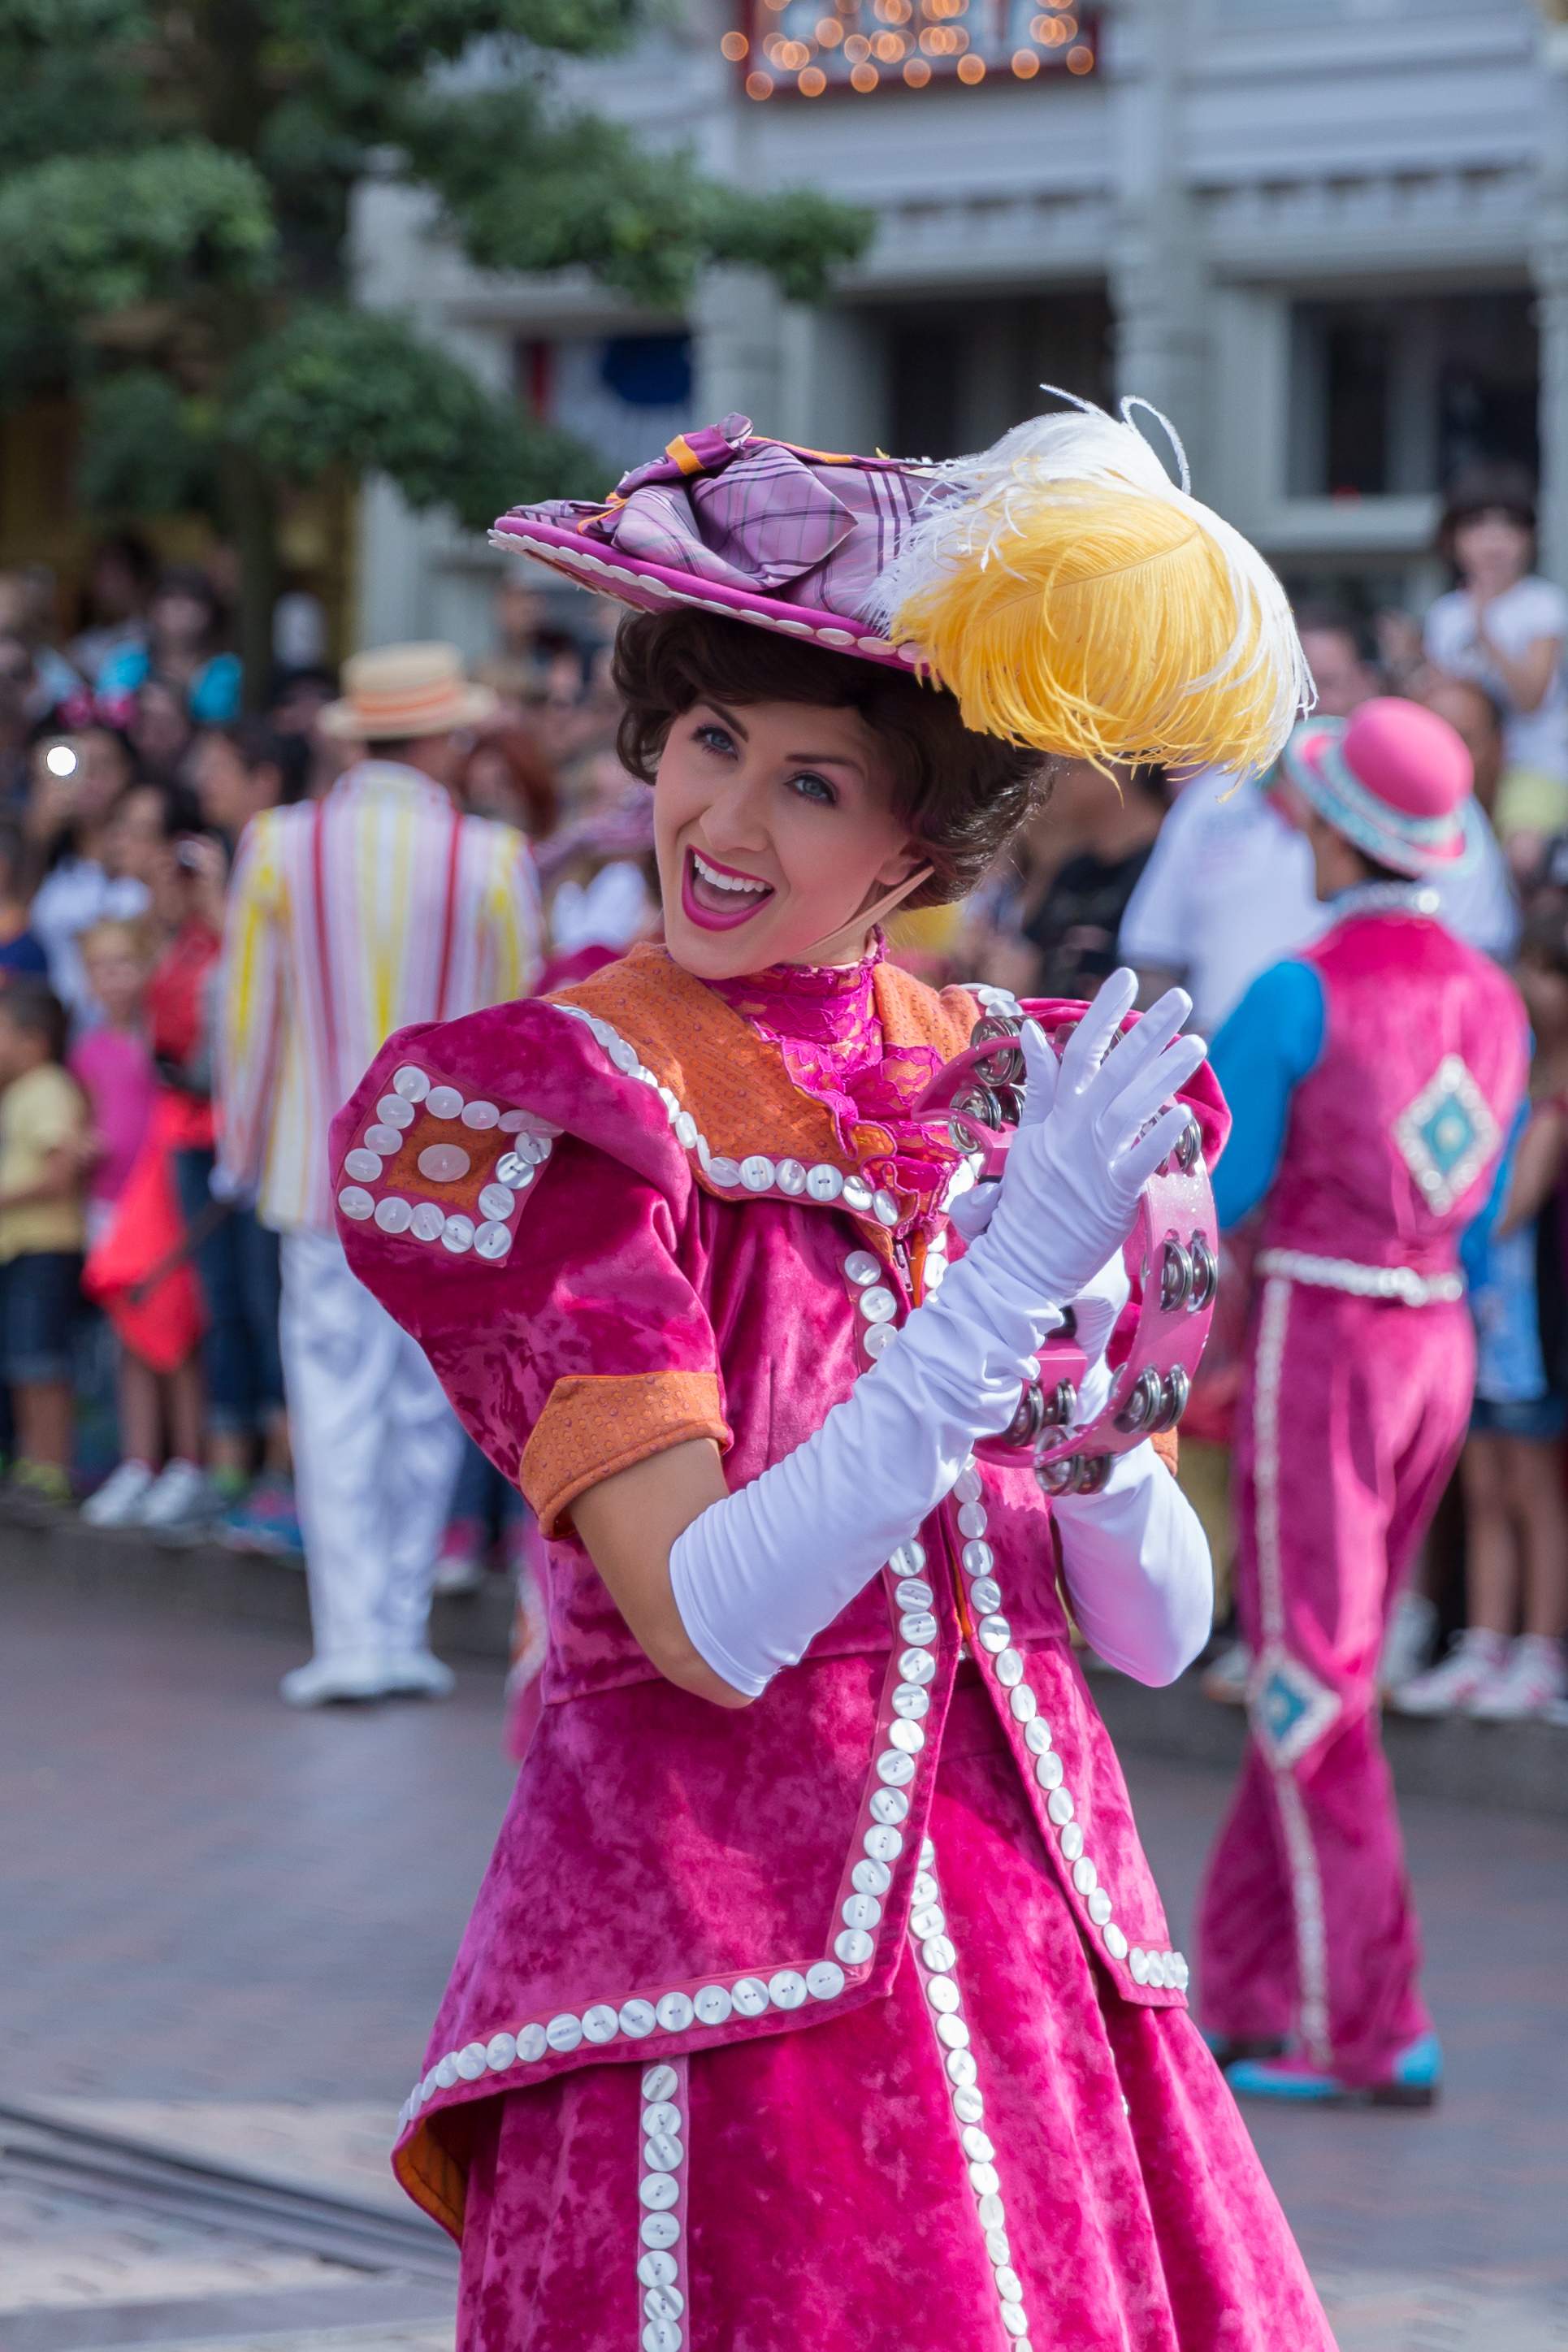 Personnage Disney - Mary Poppins - 20150804 16h51 (10970)